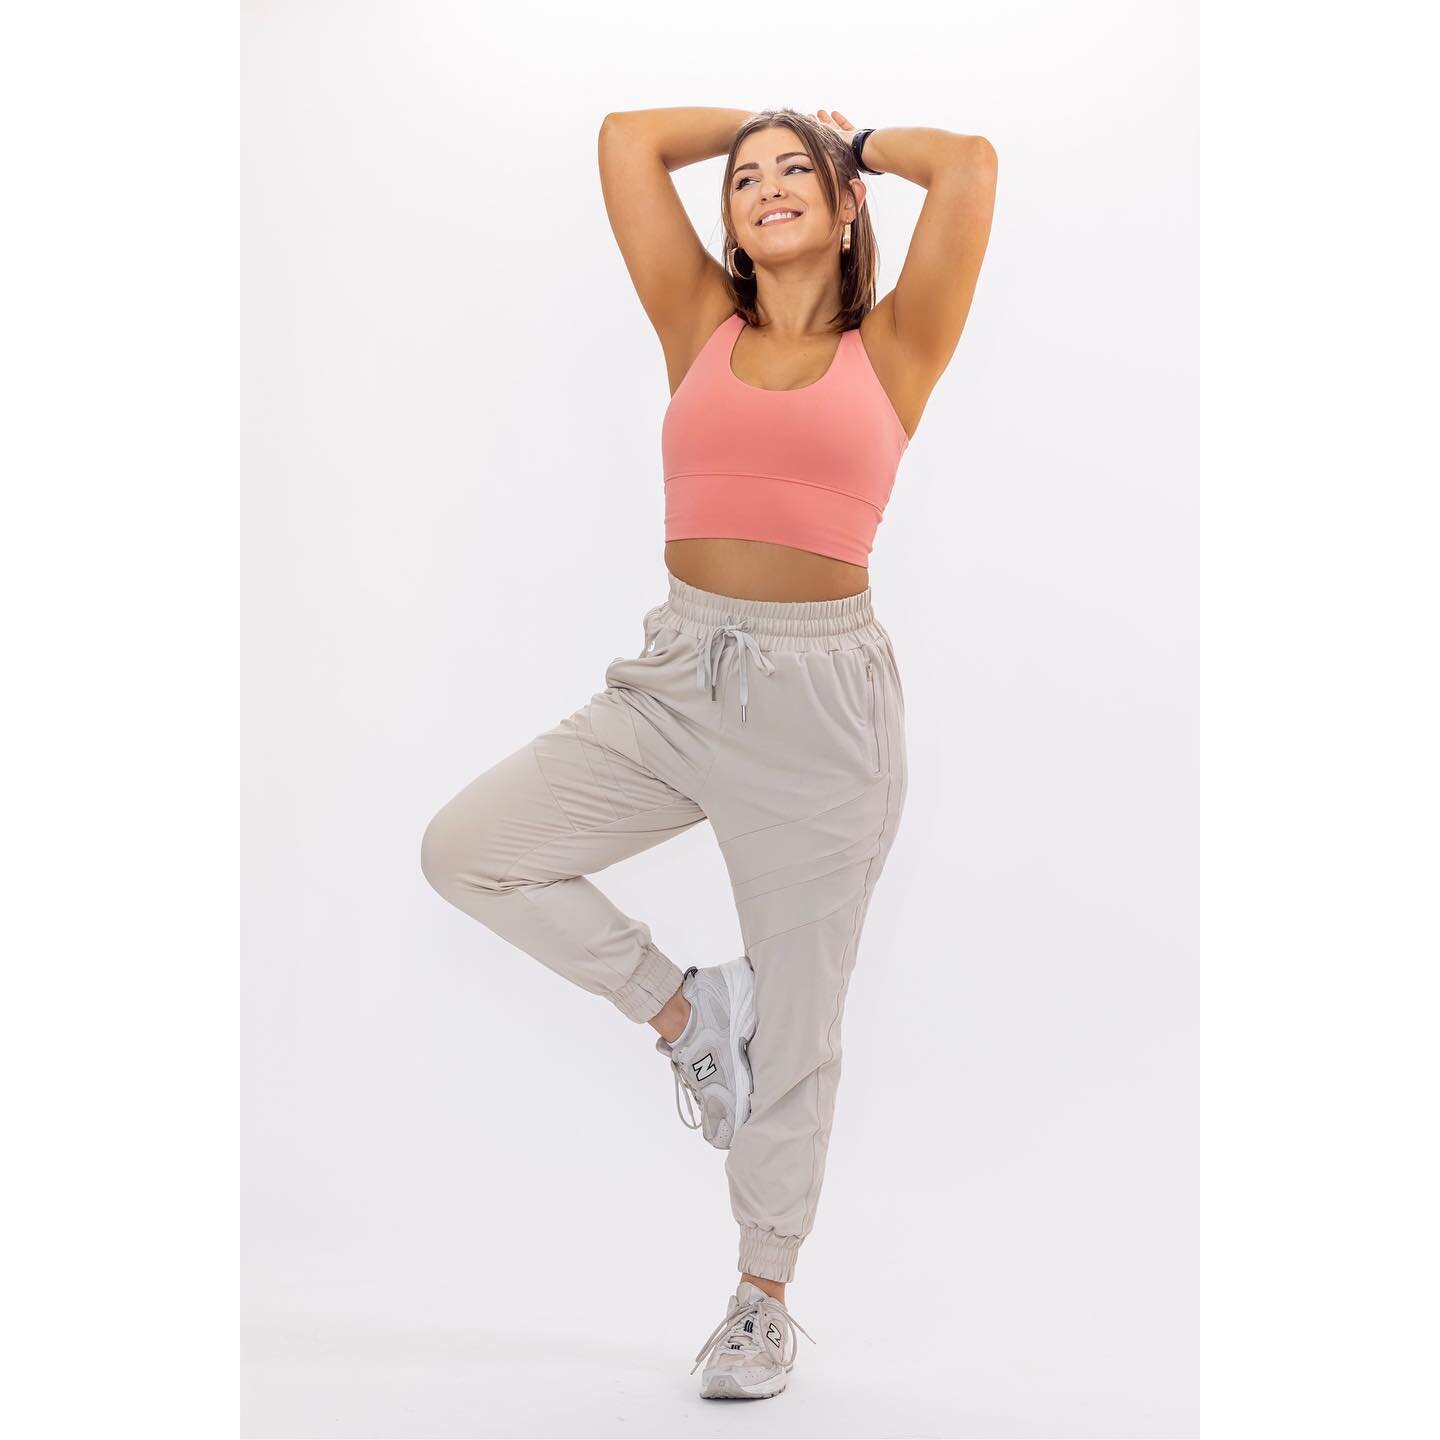 everyday stretch joggers available on activebooty.com right now!! Sizes XS-5X and in black and oatmeal!

We put our heart and soul into every piece we design, and I hope you love these as much as we do!